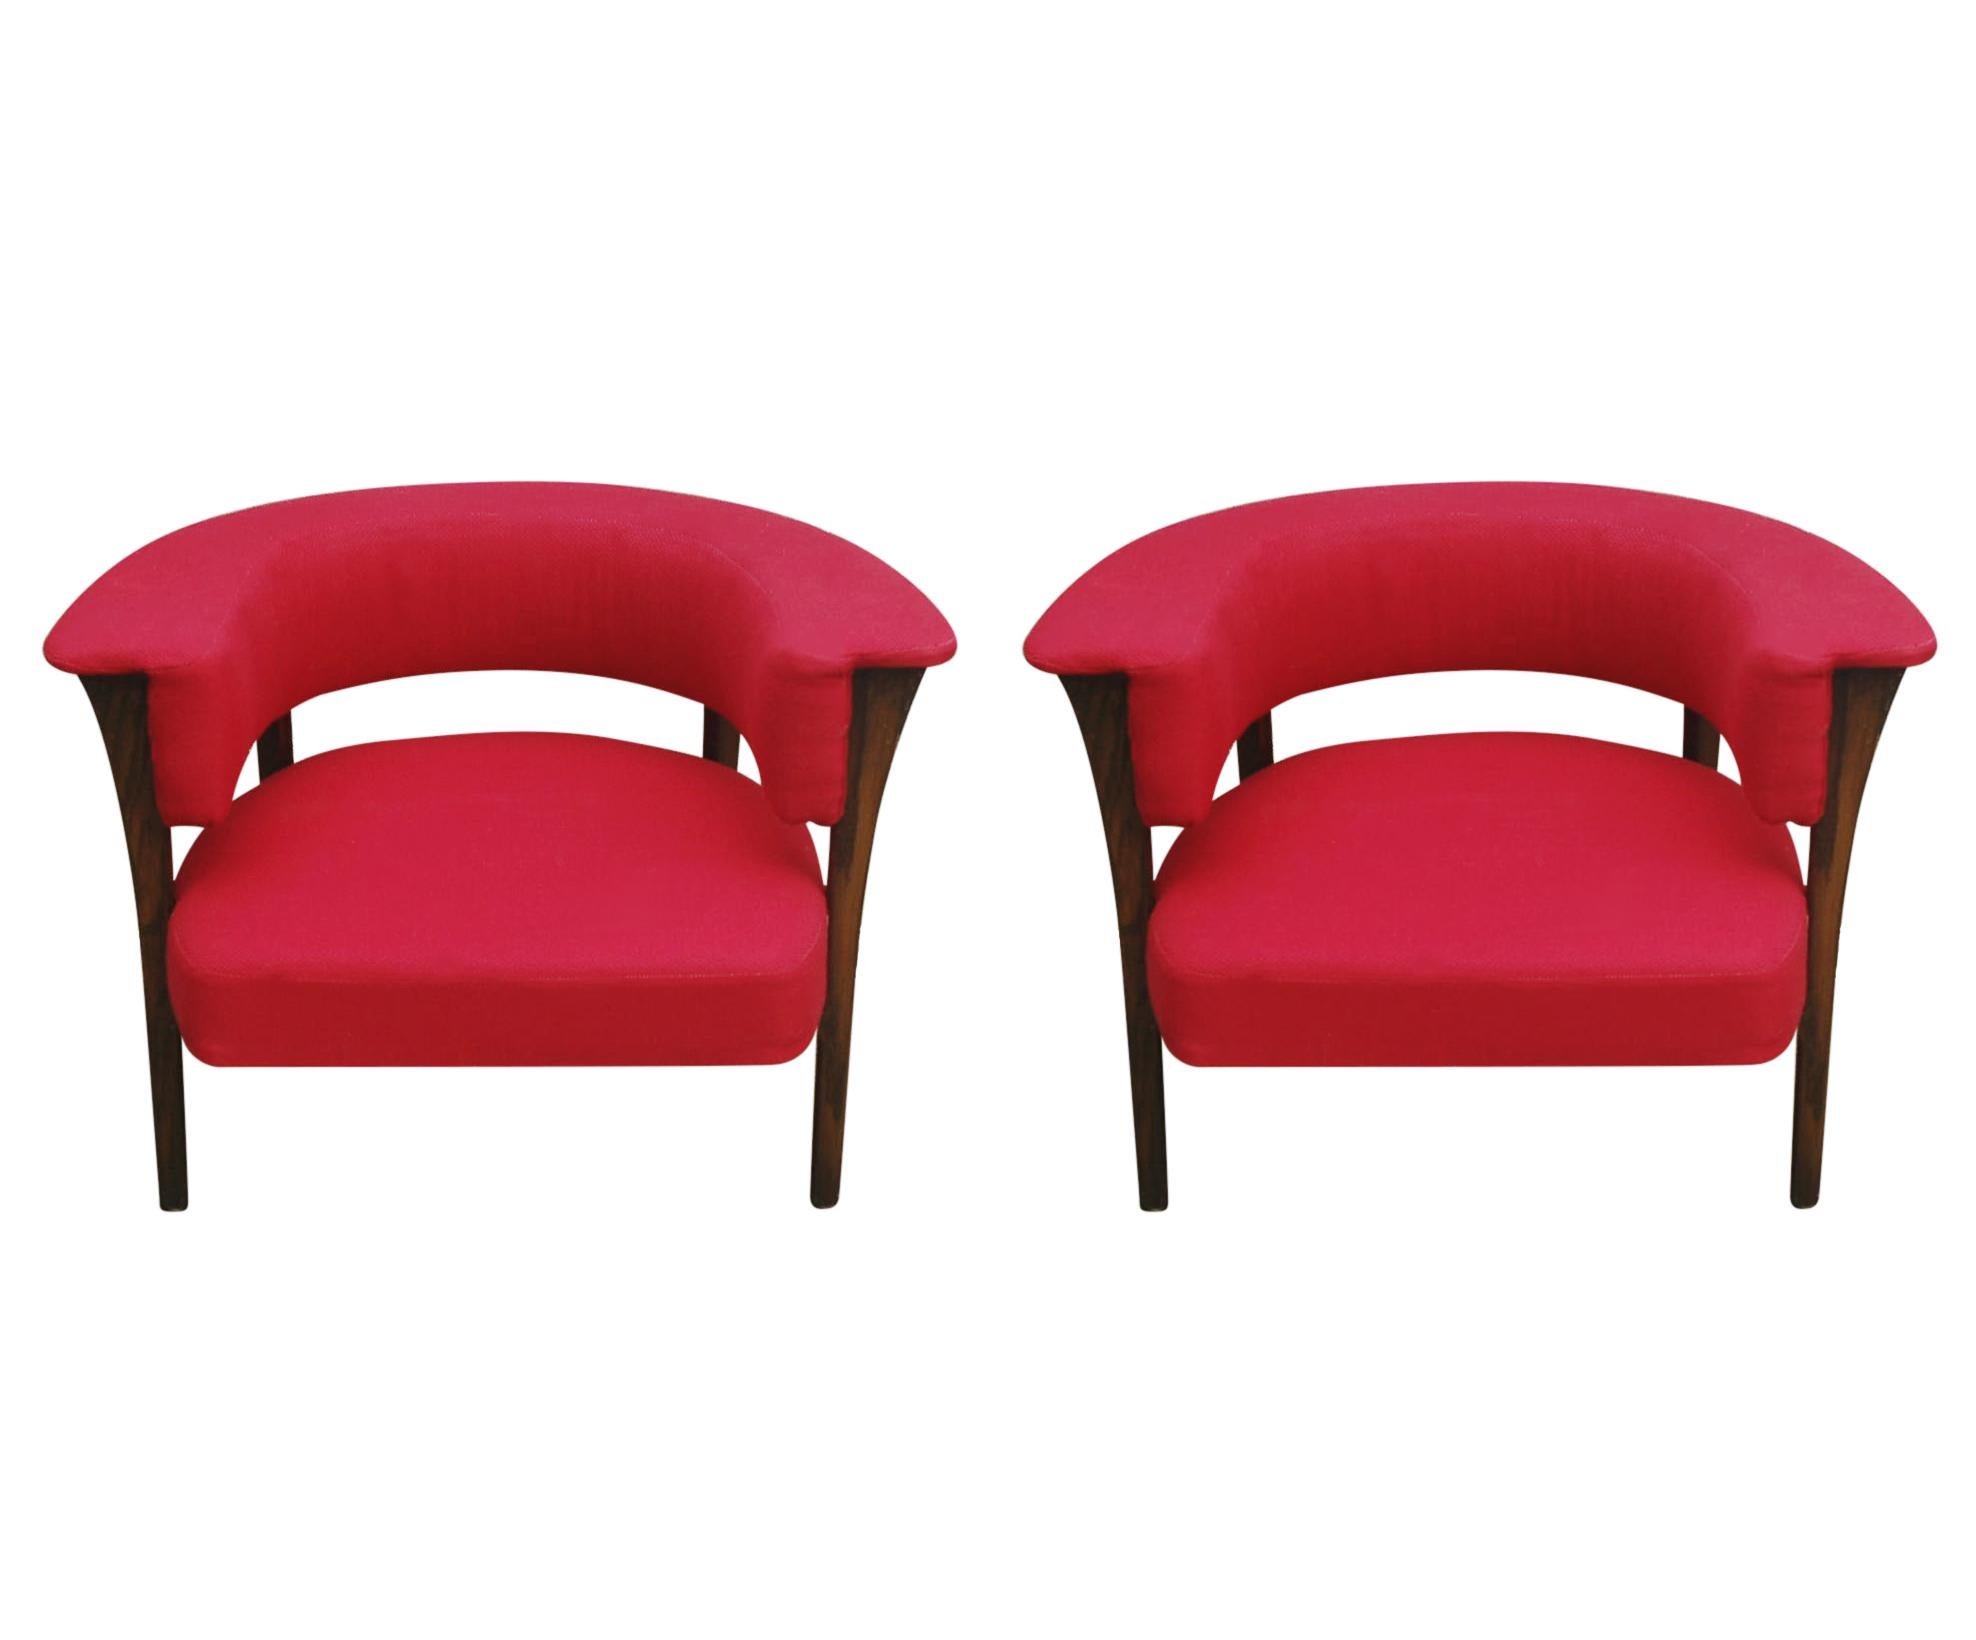 American Mid-Century Modern Barrel Back Lounge Chairs in Red Fabric with Walnut Oakwood